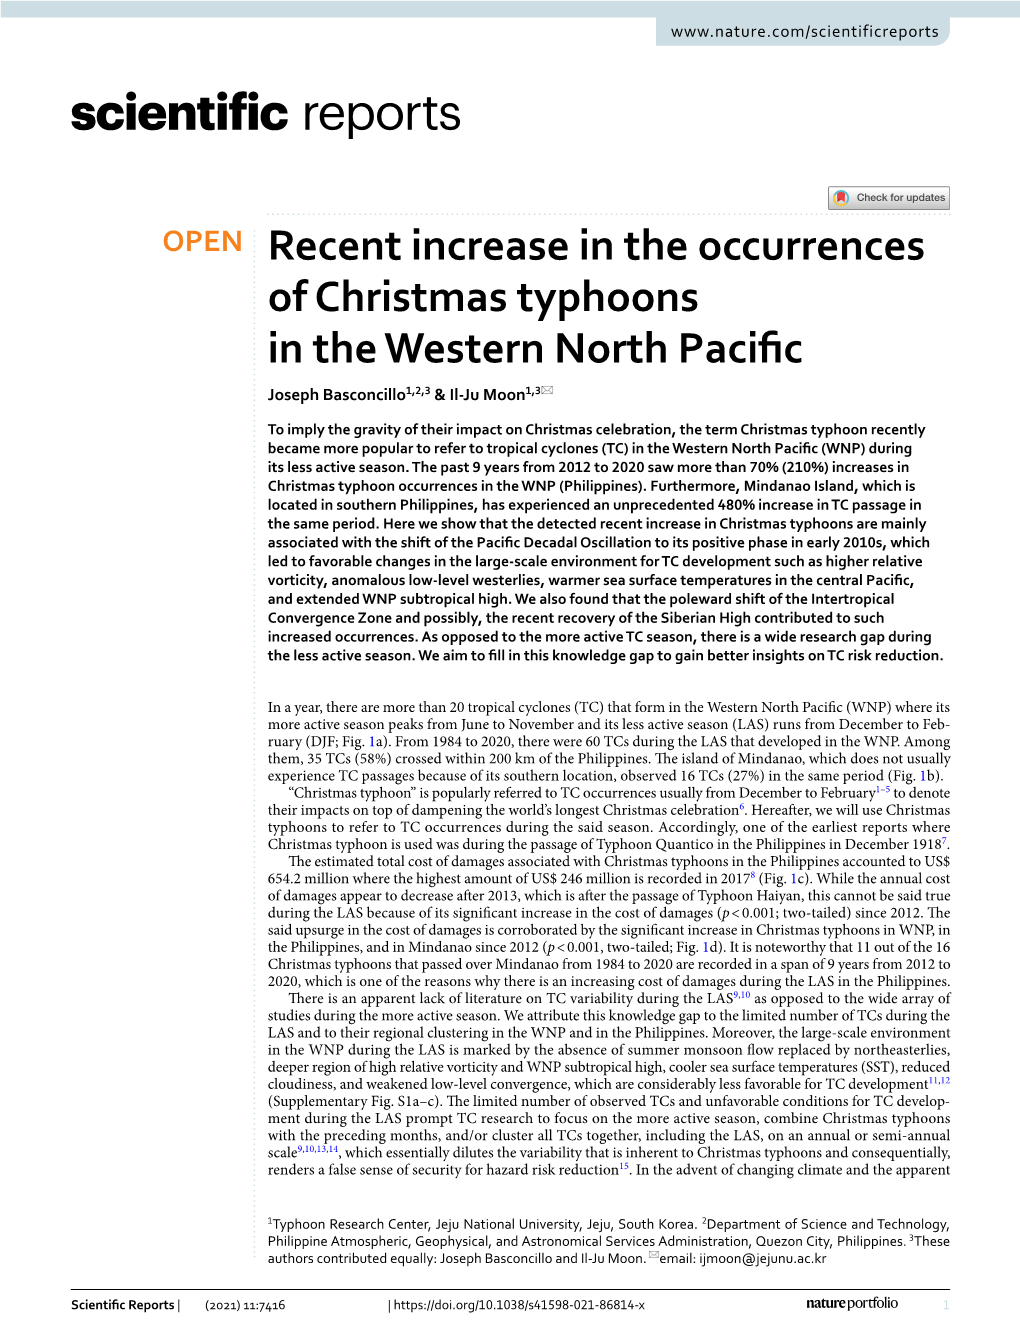 Recent Increase in the Occurrences of Christmas Typhoons in the Western North Pacific